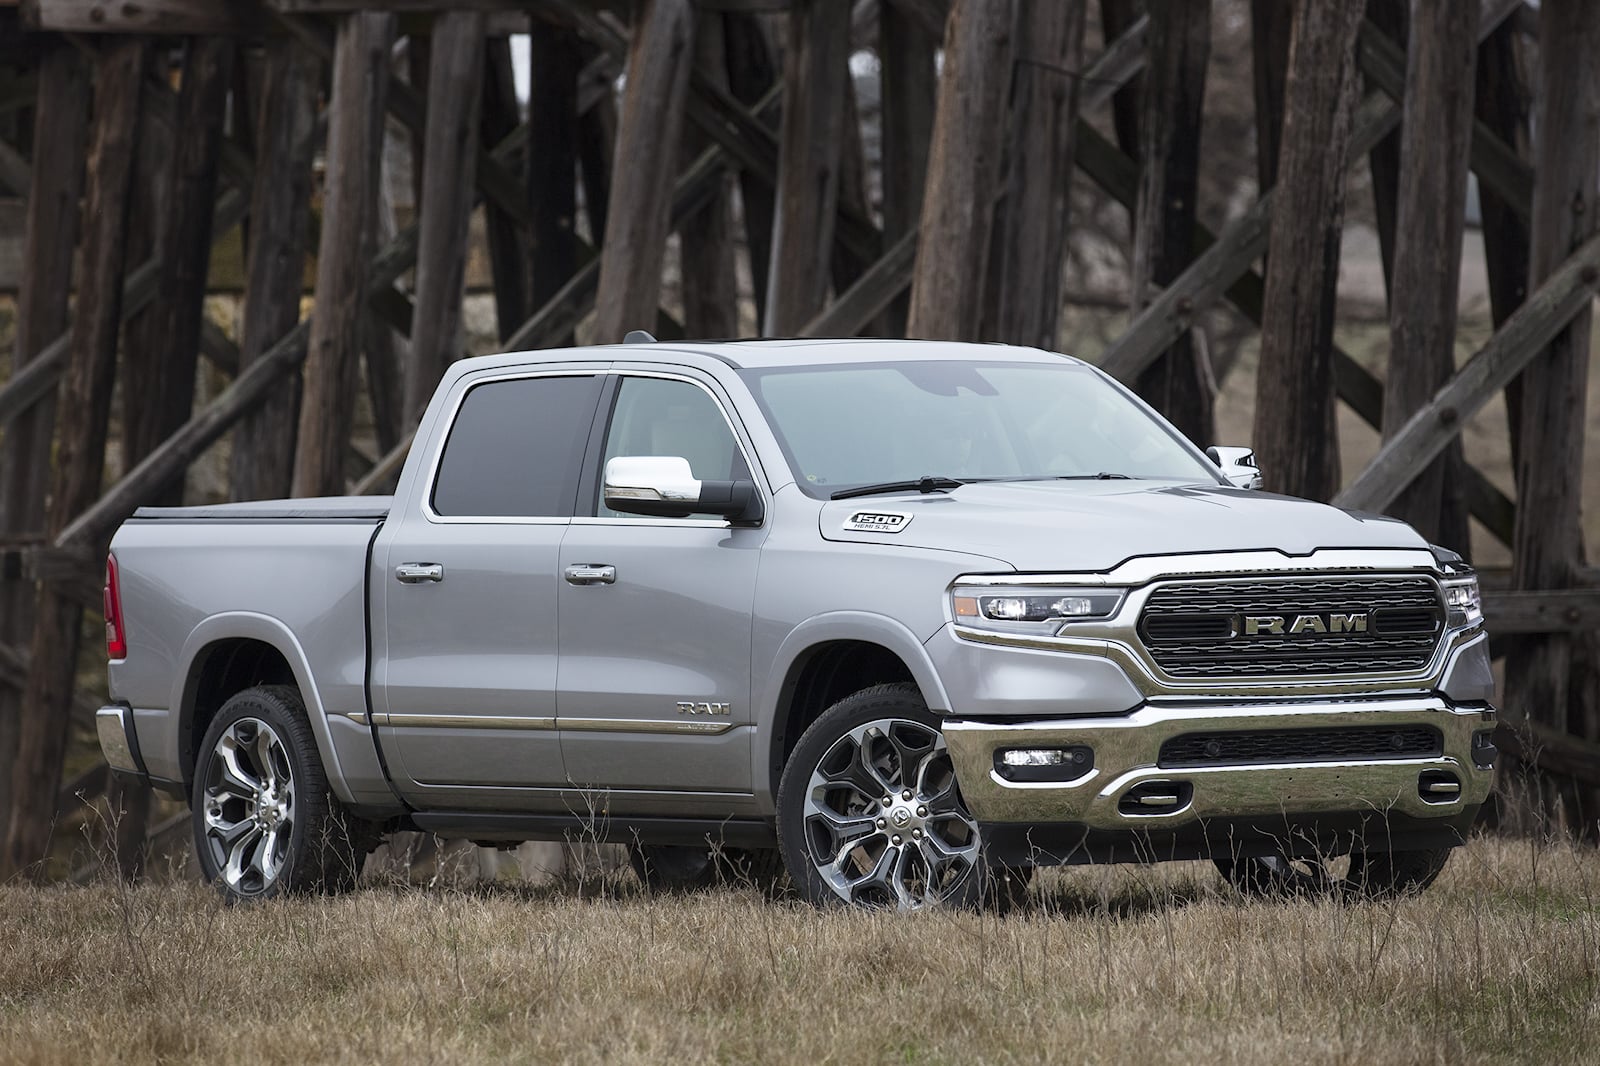 ram-has-more-loyal-truck-owners-than-ford-and-chevy-carbuzz